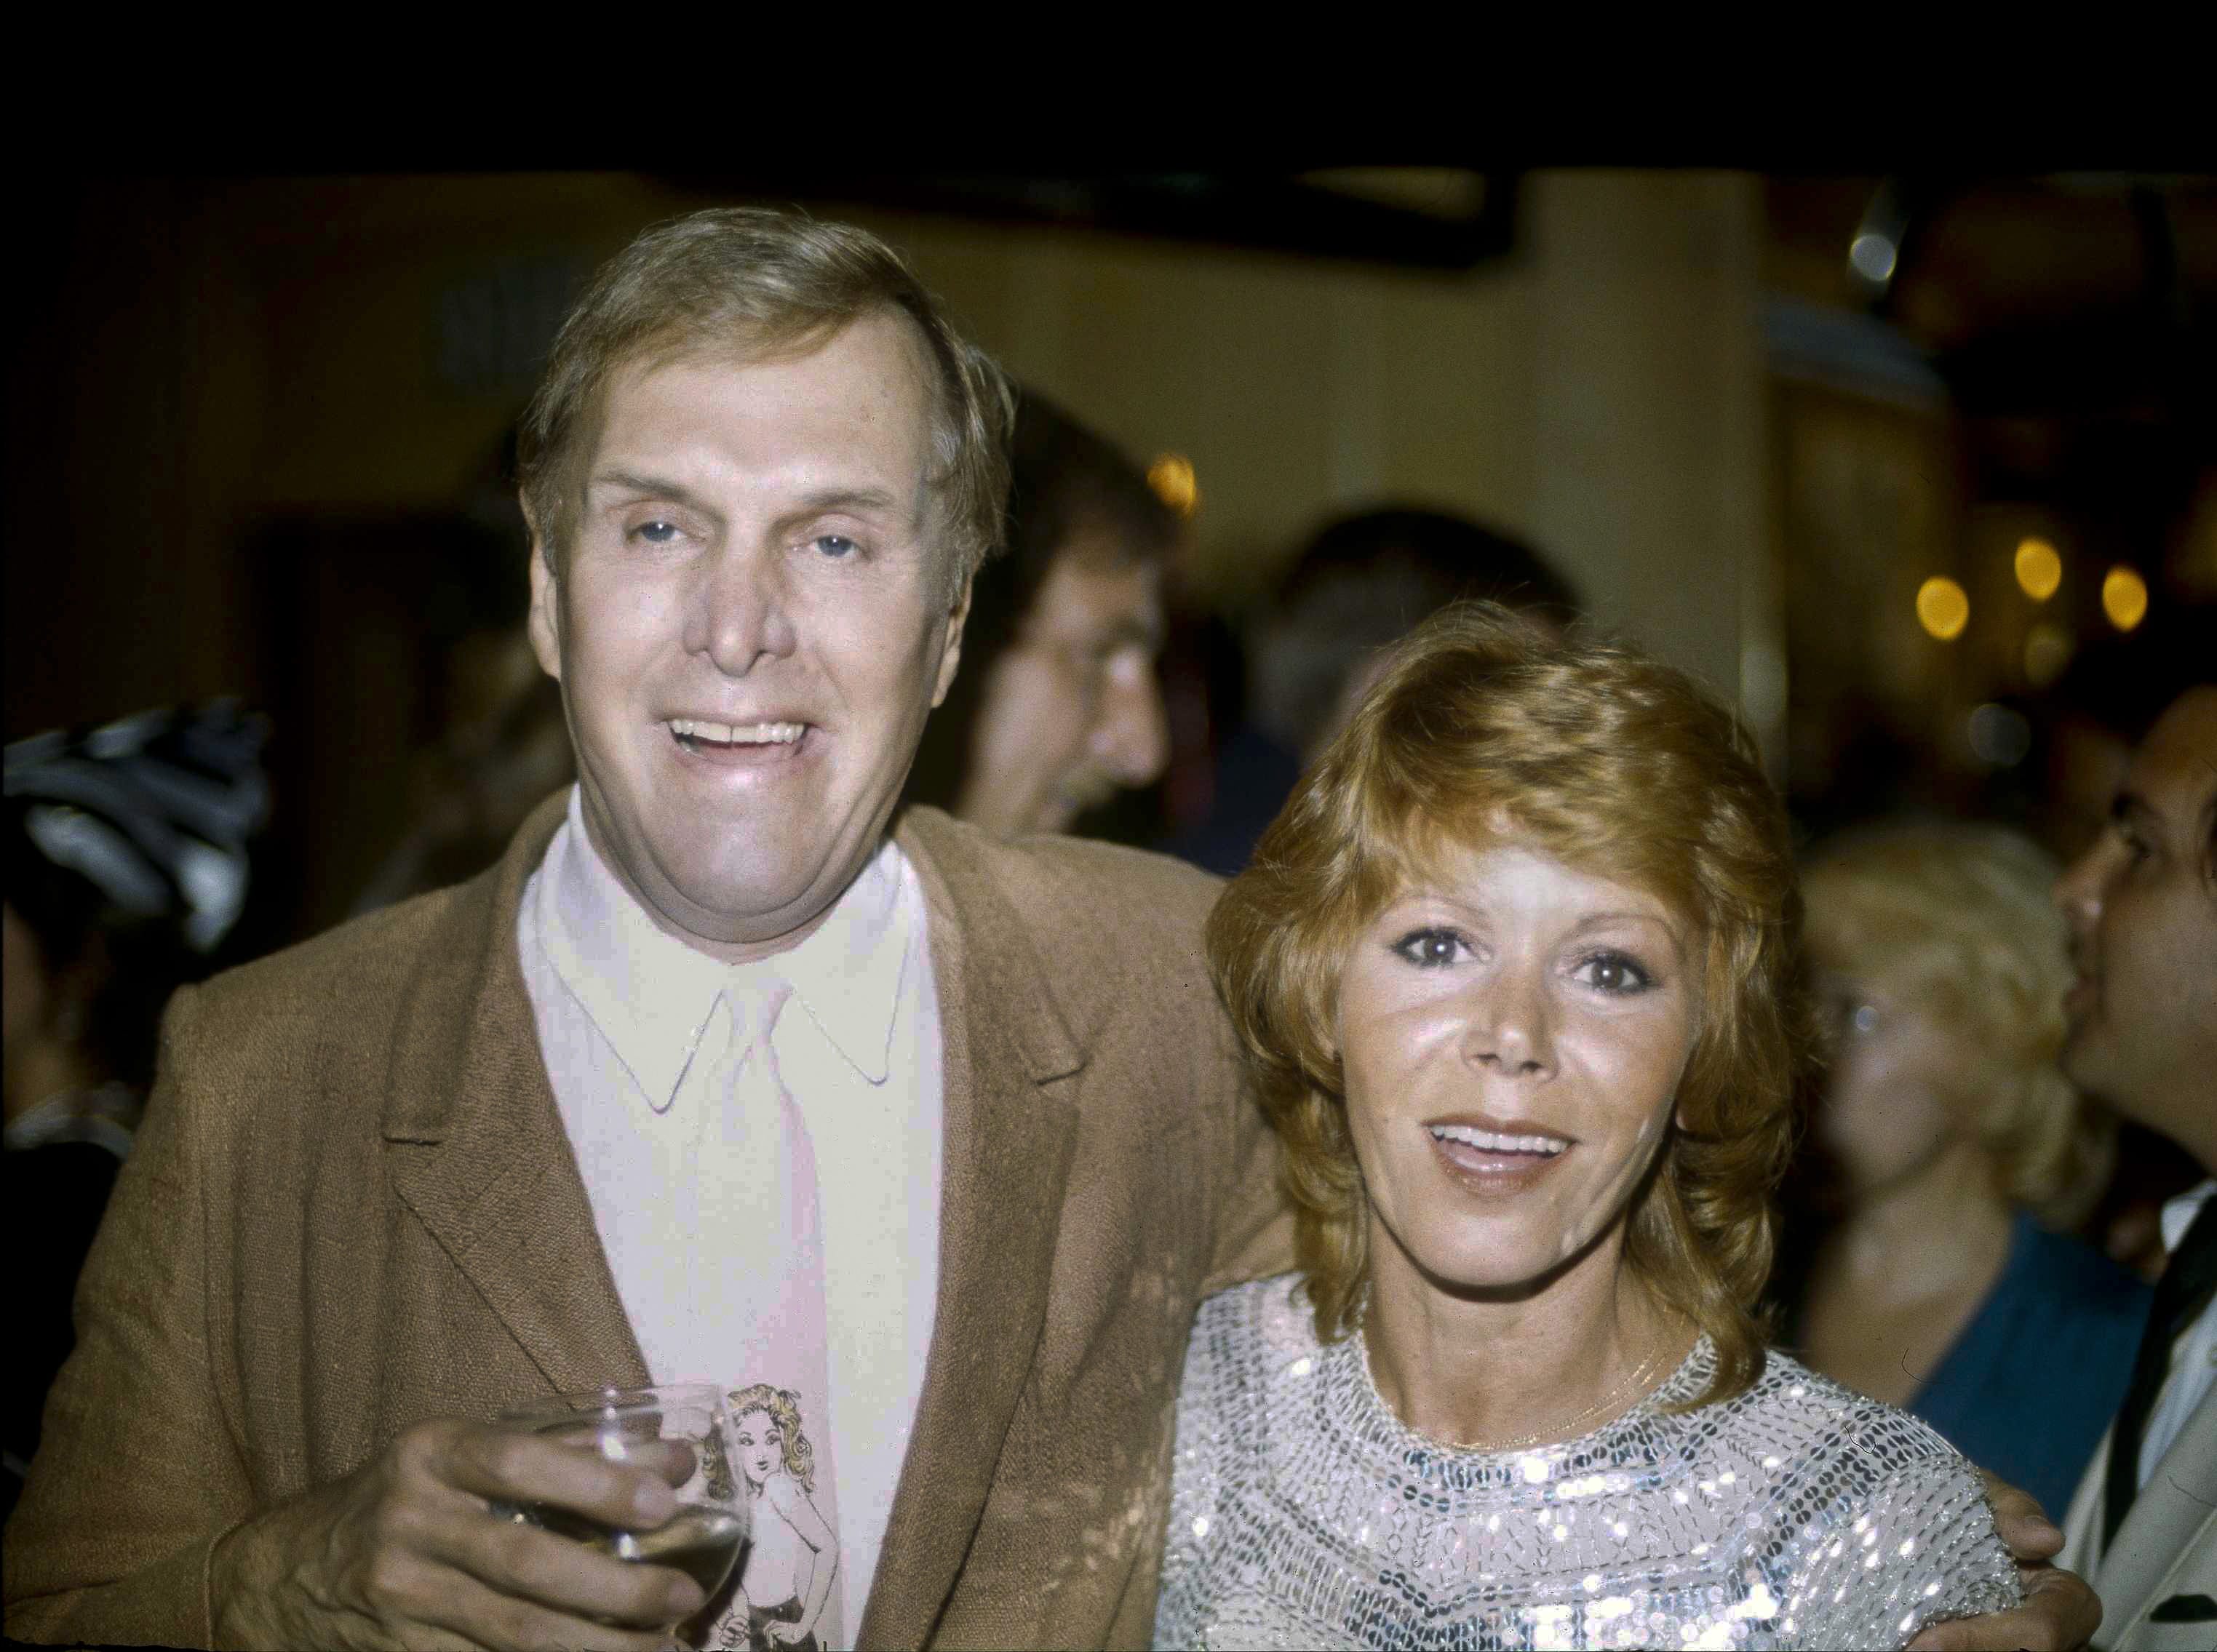 FILE - In this Tuesday, Sept. 13, 1983 file photo, actors Judy Carne and Alan Sues, left, of &quot;Rowan And Martin's Laugh-In&quot; are shown during a &quot;Laugh-In&quot; reunion party, in Los Angeles. &igrave;Laugh-In&icirc; star Judy Carne has died in a British hospital. She was 76. She was famous for popularizing the &igrave;Sock it to Me&icirc; phrase on the hit TV show that started in the late 1960s. Her death was confirmed Tuesday, Sept. 8, 2015 in an e-mail by Eva Duffy, spokeswoman for Northampton General Hospital. Duffy said Carne died in the hospital on September 3. Newspaper reports said she had suffered from pneumonia.